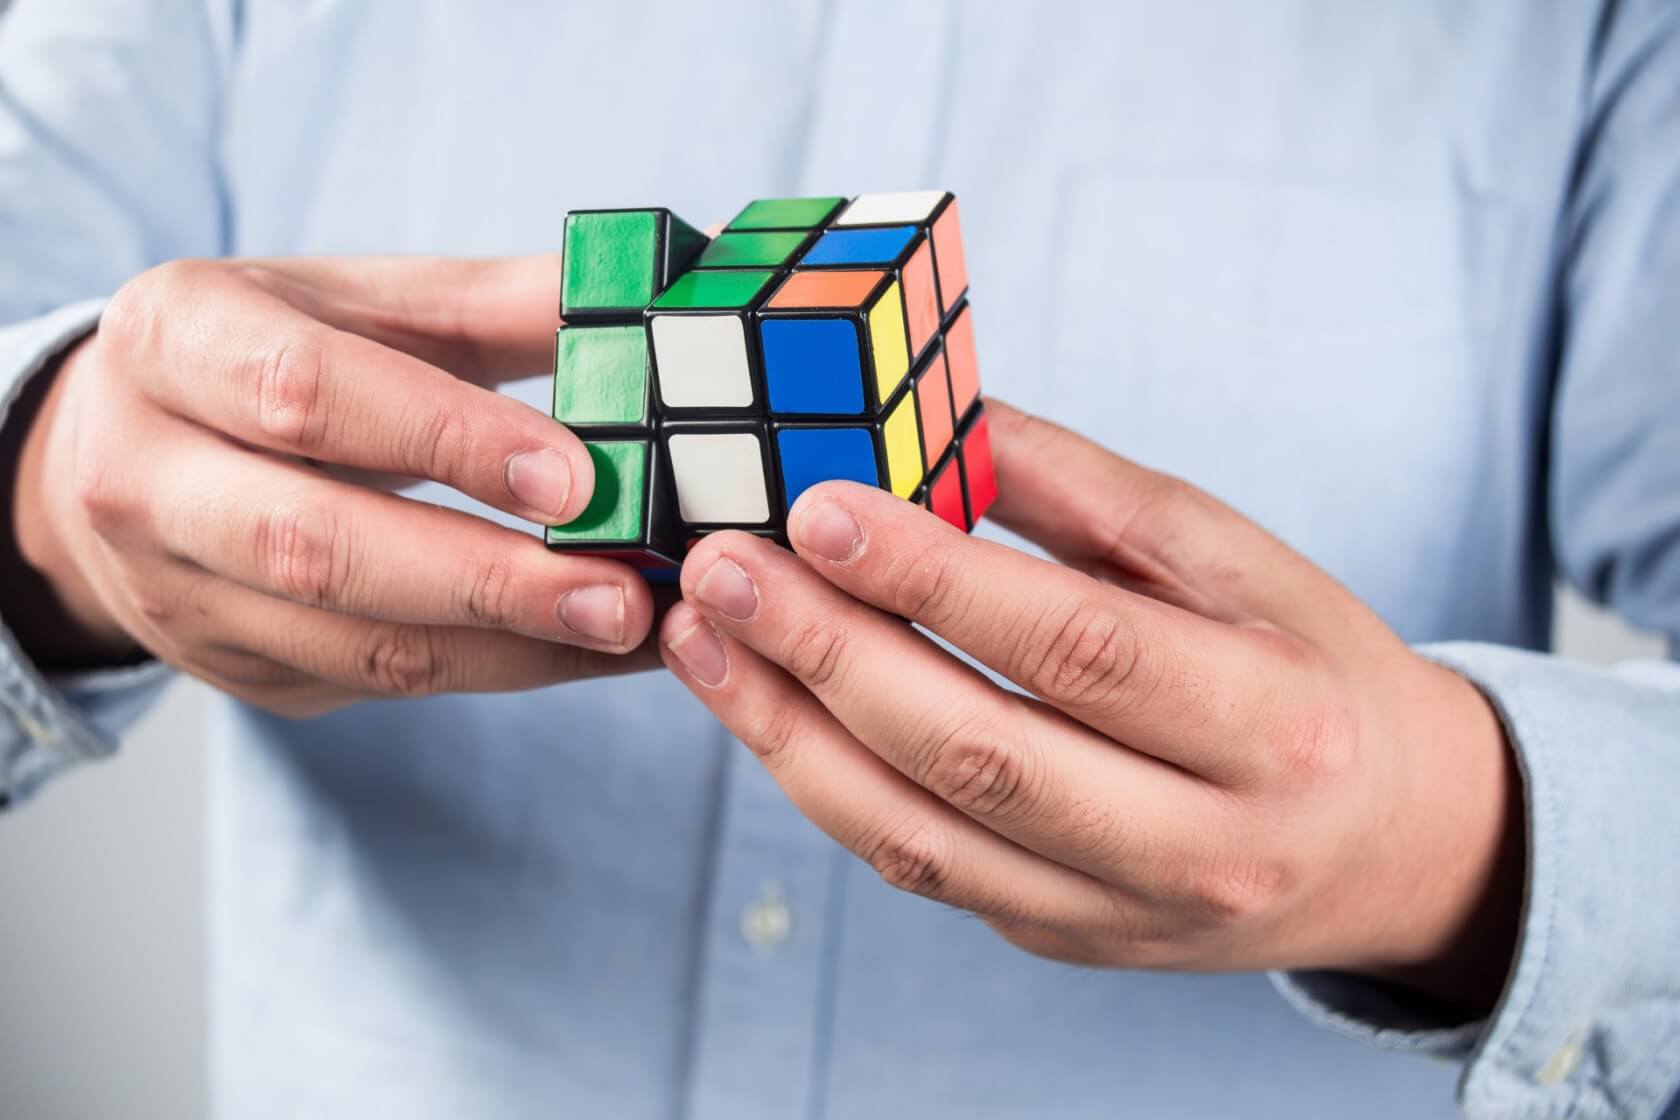 Researchers have taught AI to solve a Rubik's Cube in just 1.2 seconds